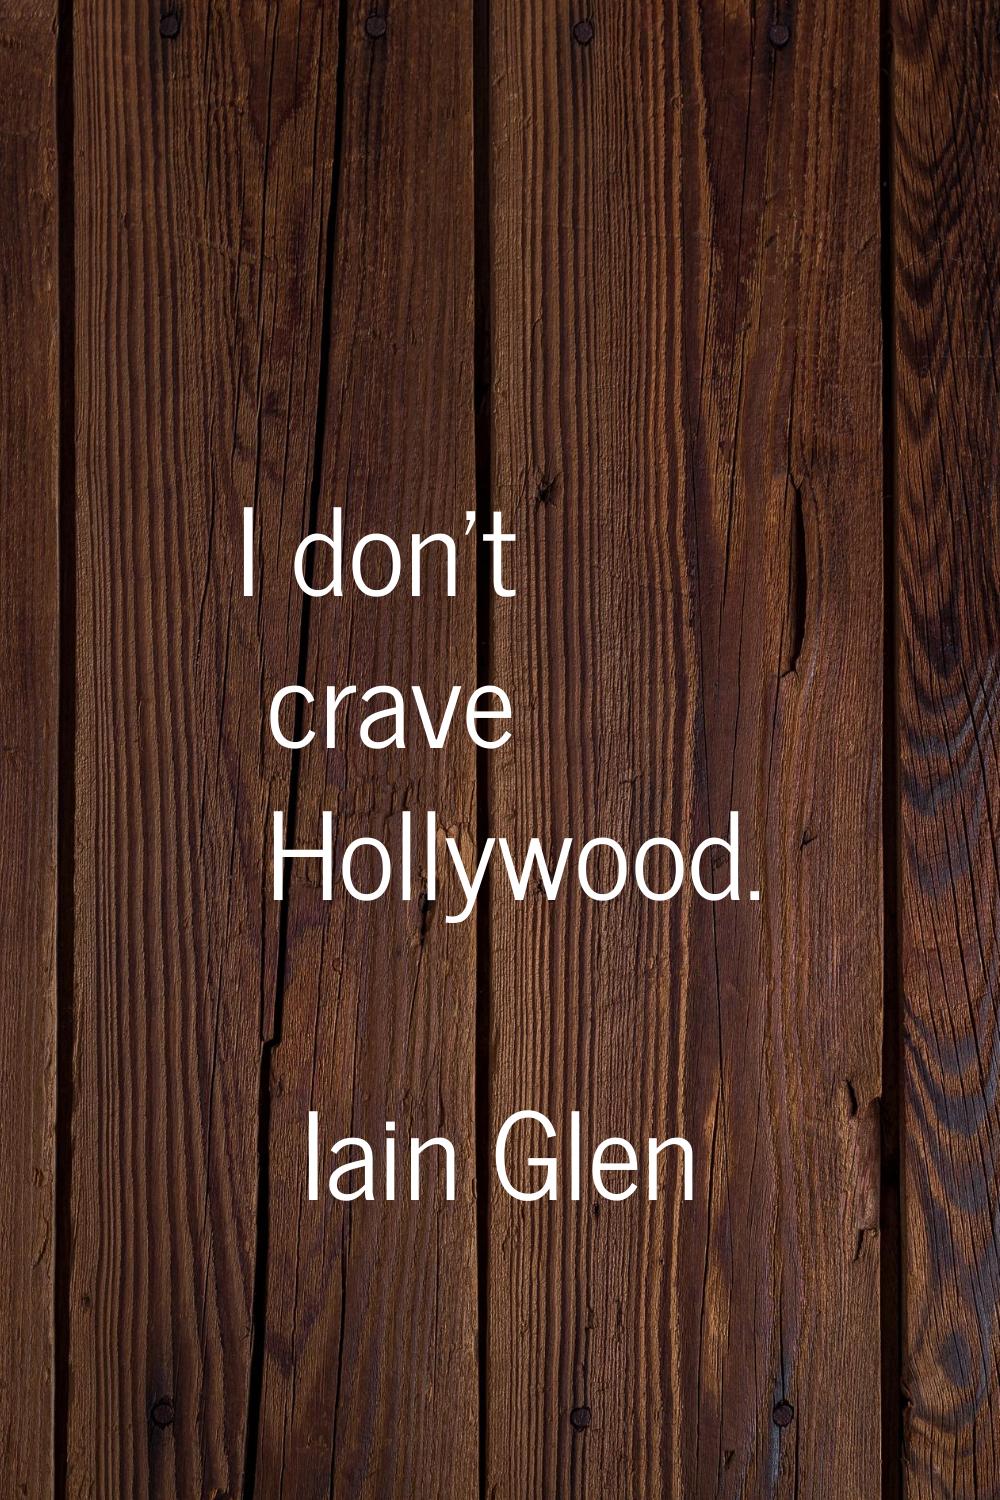 I don't crave Hollywood.